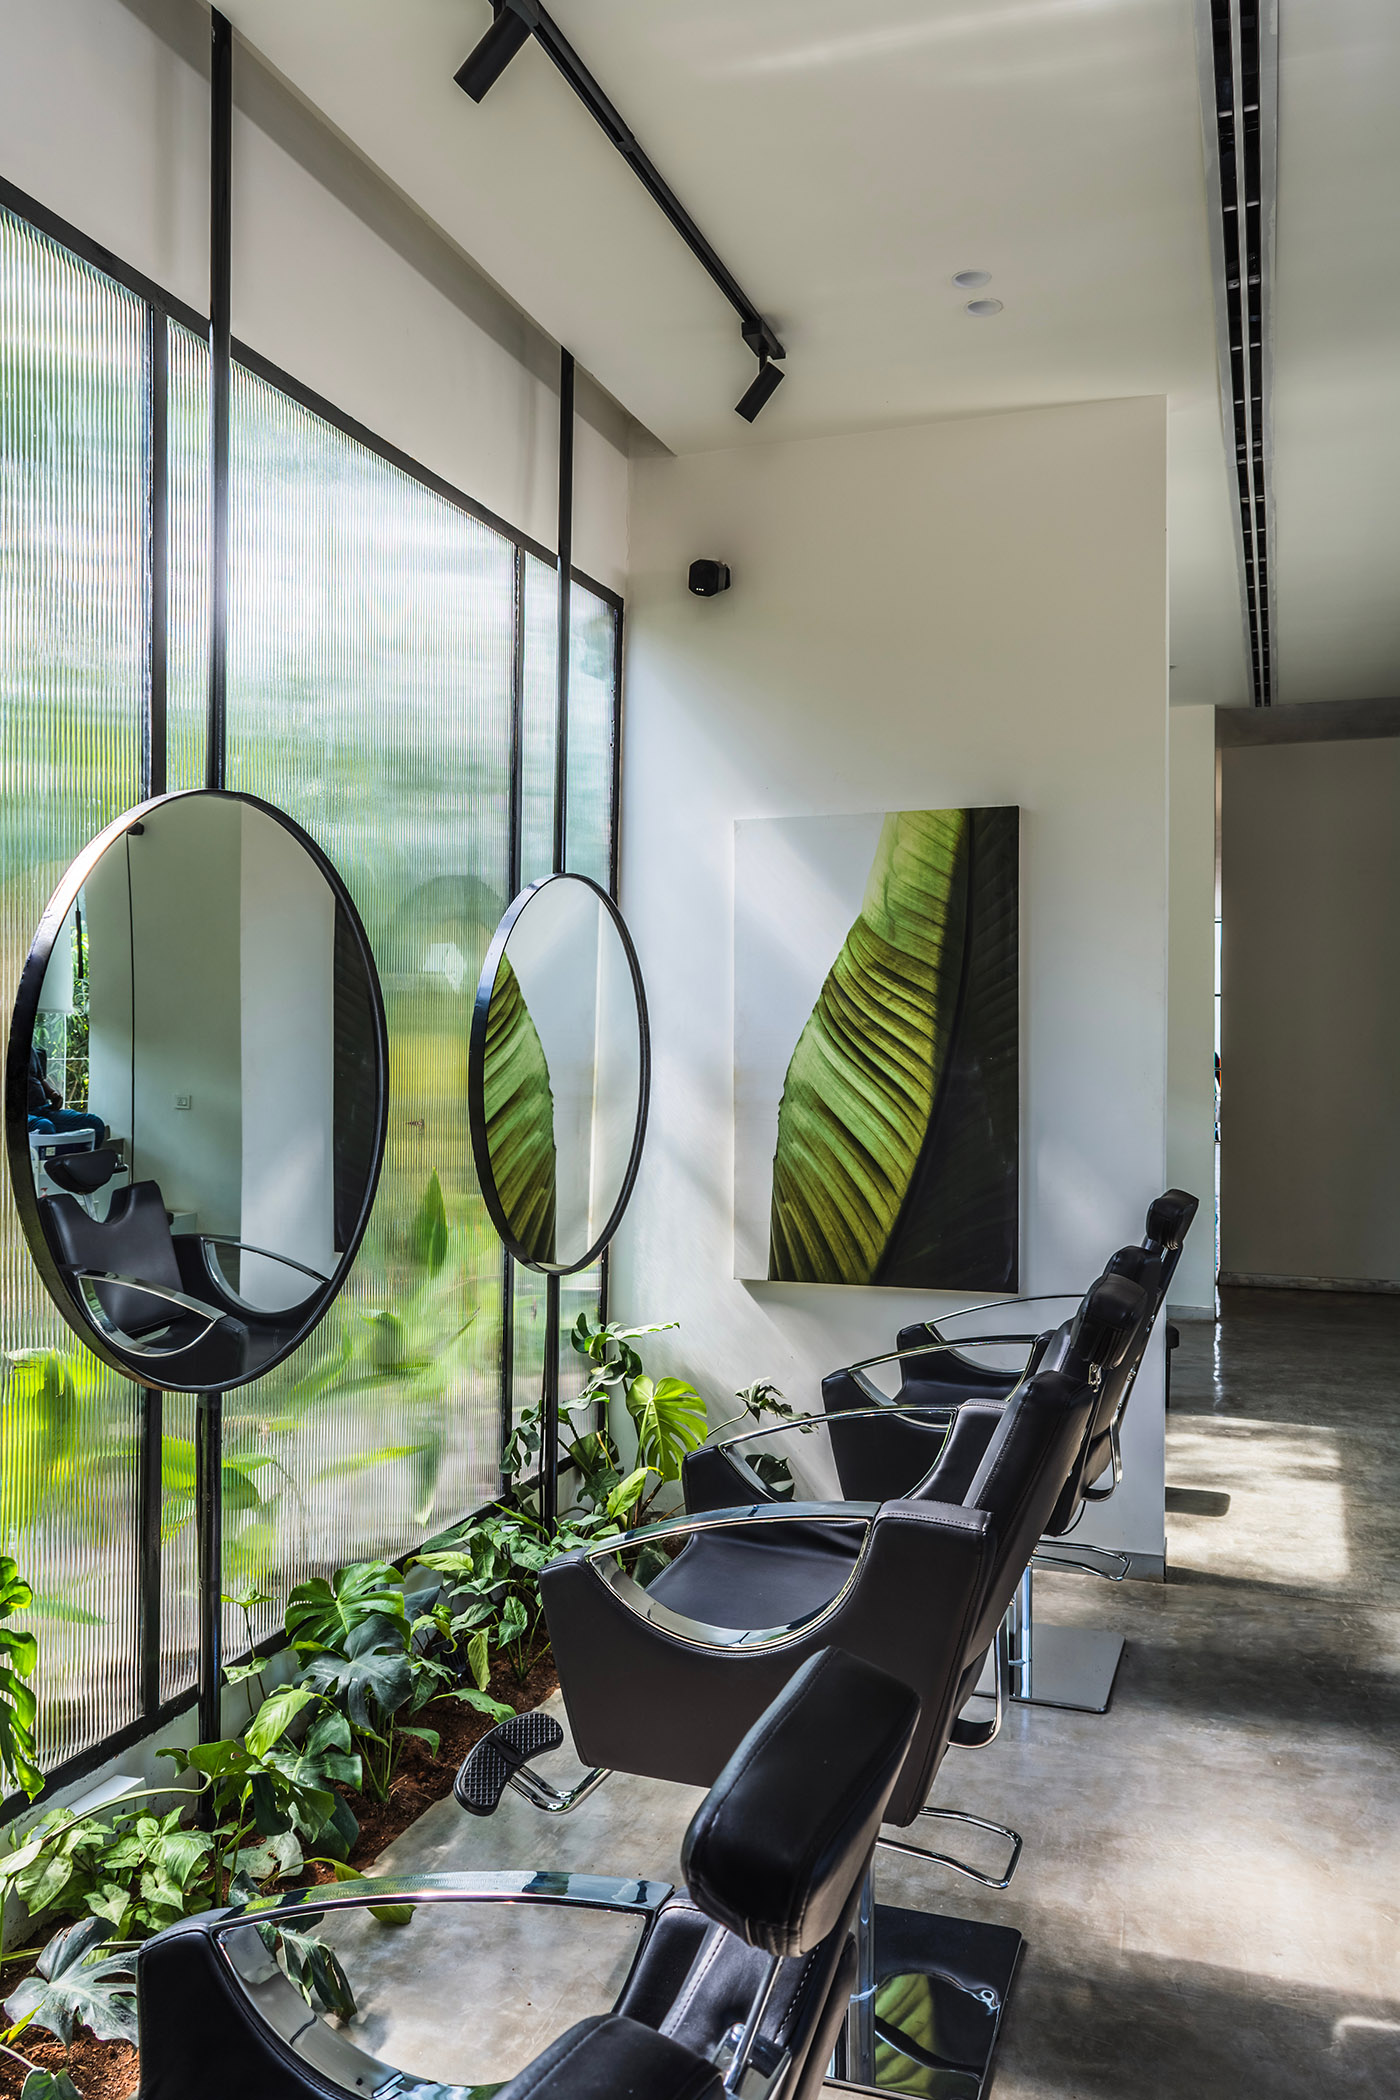 Myst Salon and Spa, from the tradition of the first Indian barber shops, a wellness experience among the foliage and the design